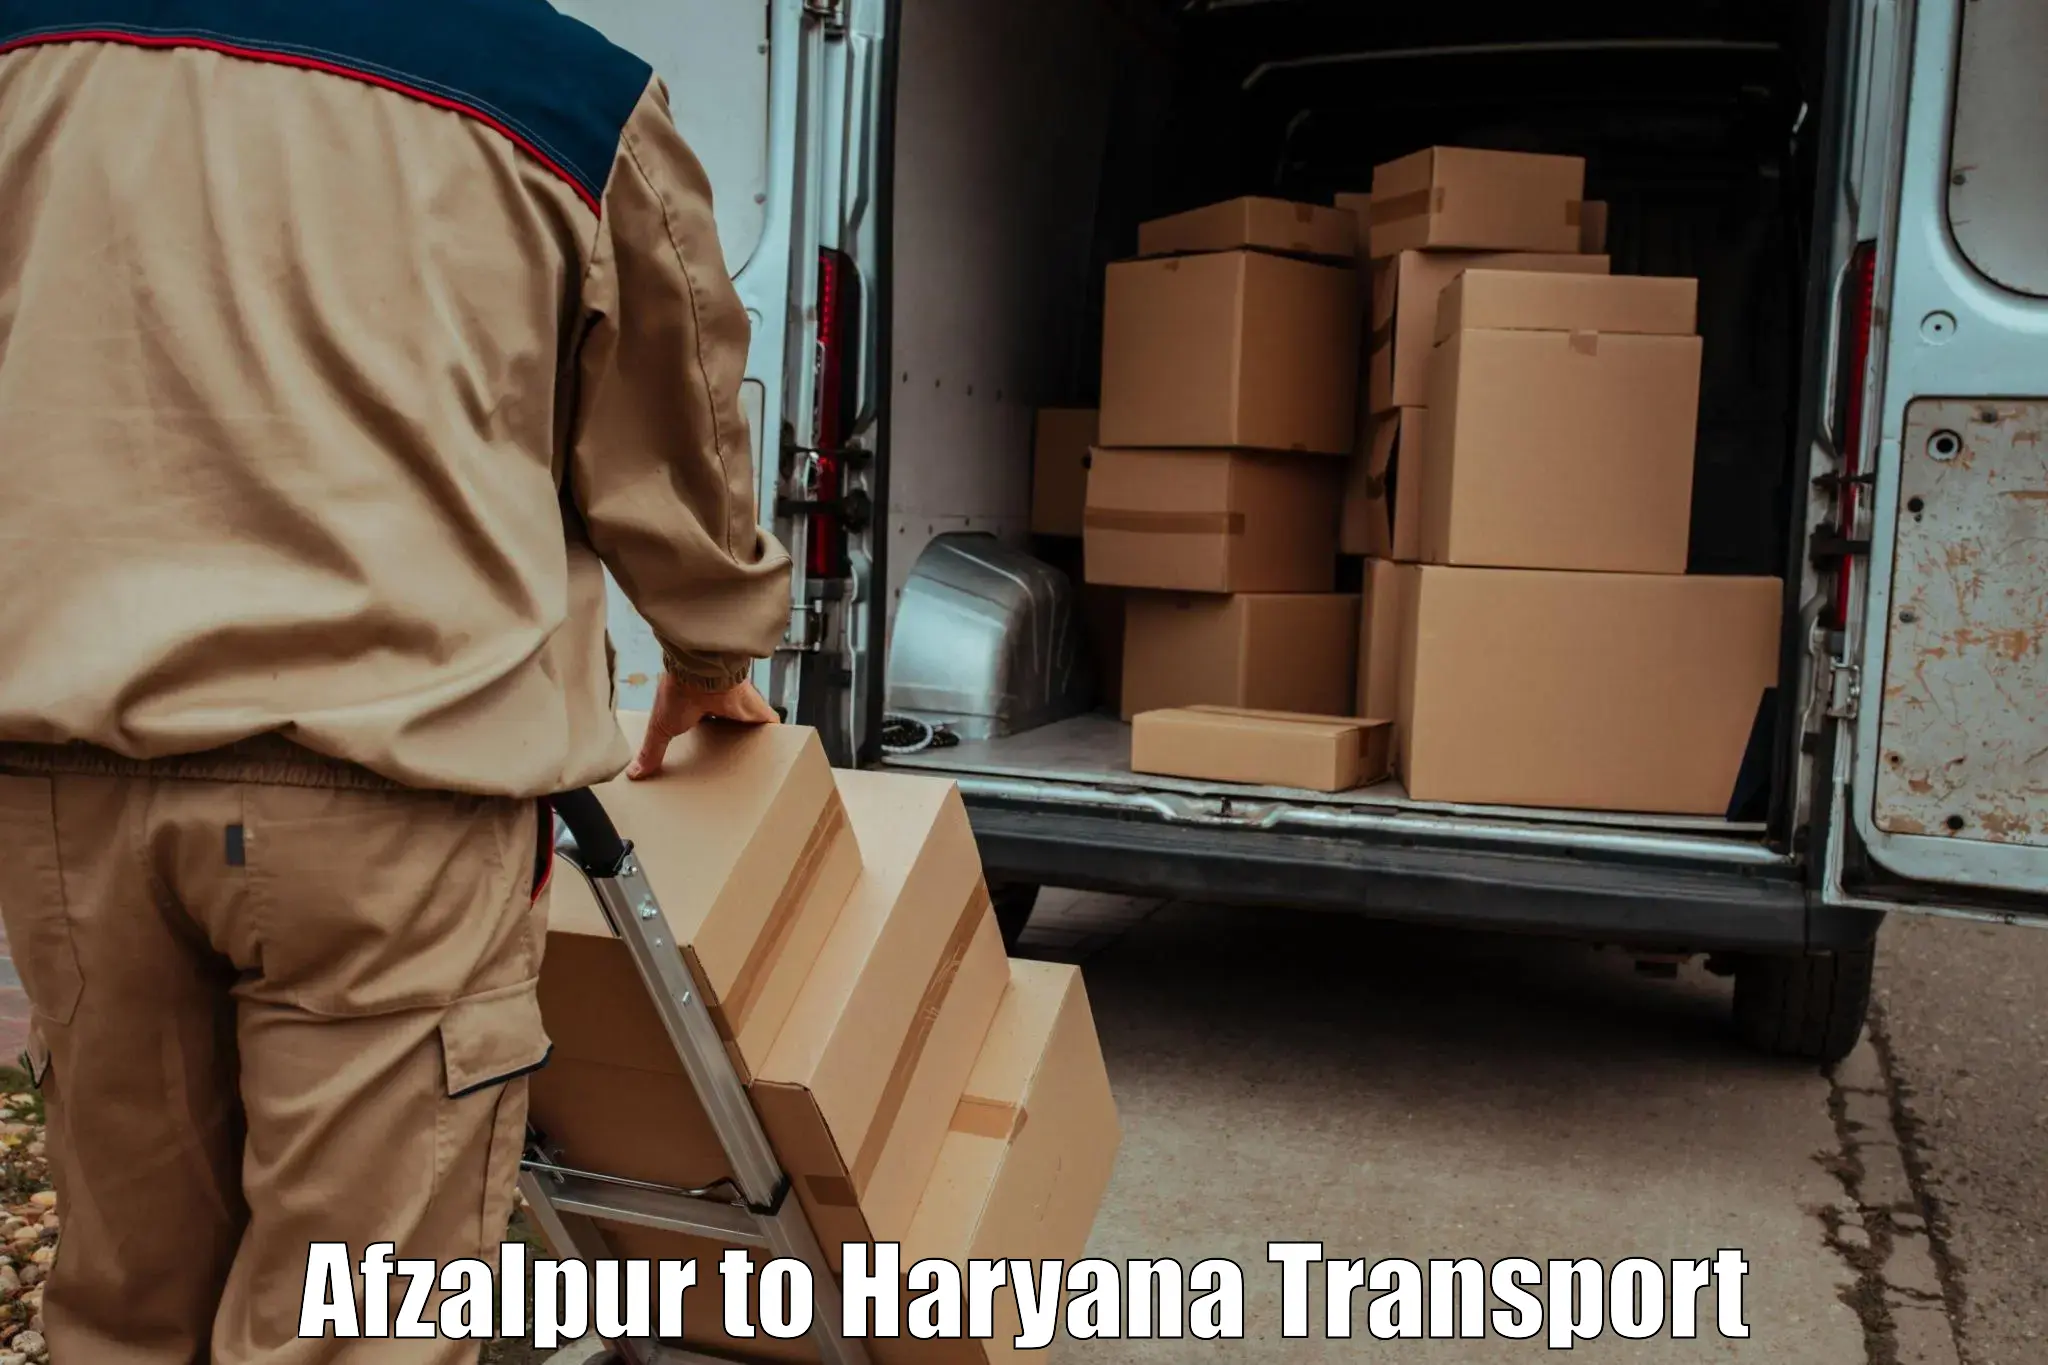 Road transport online services in Afzalpur to Faridabad